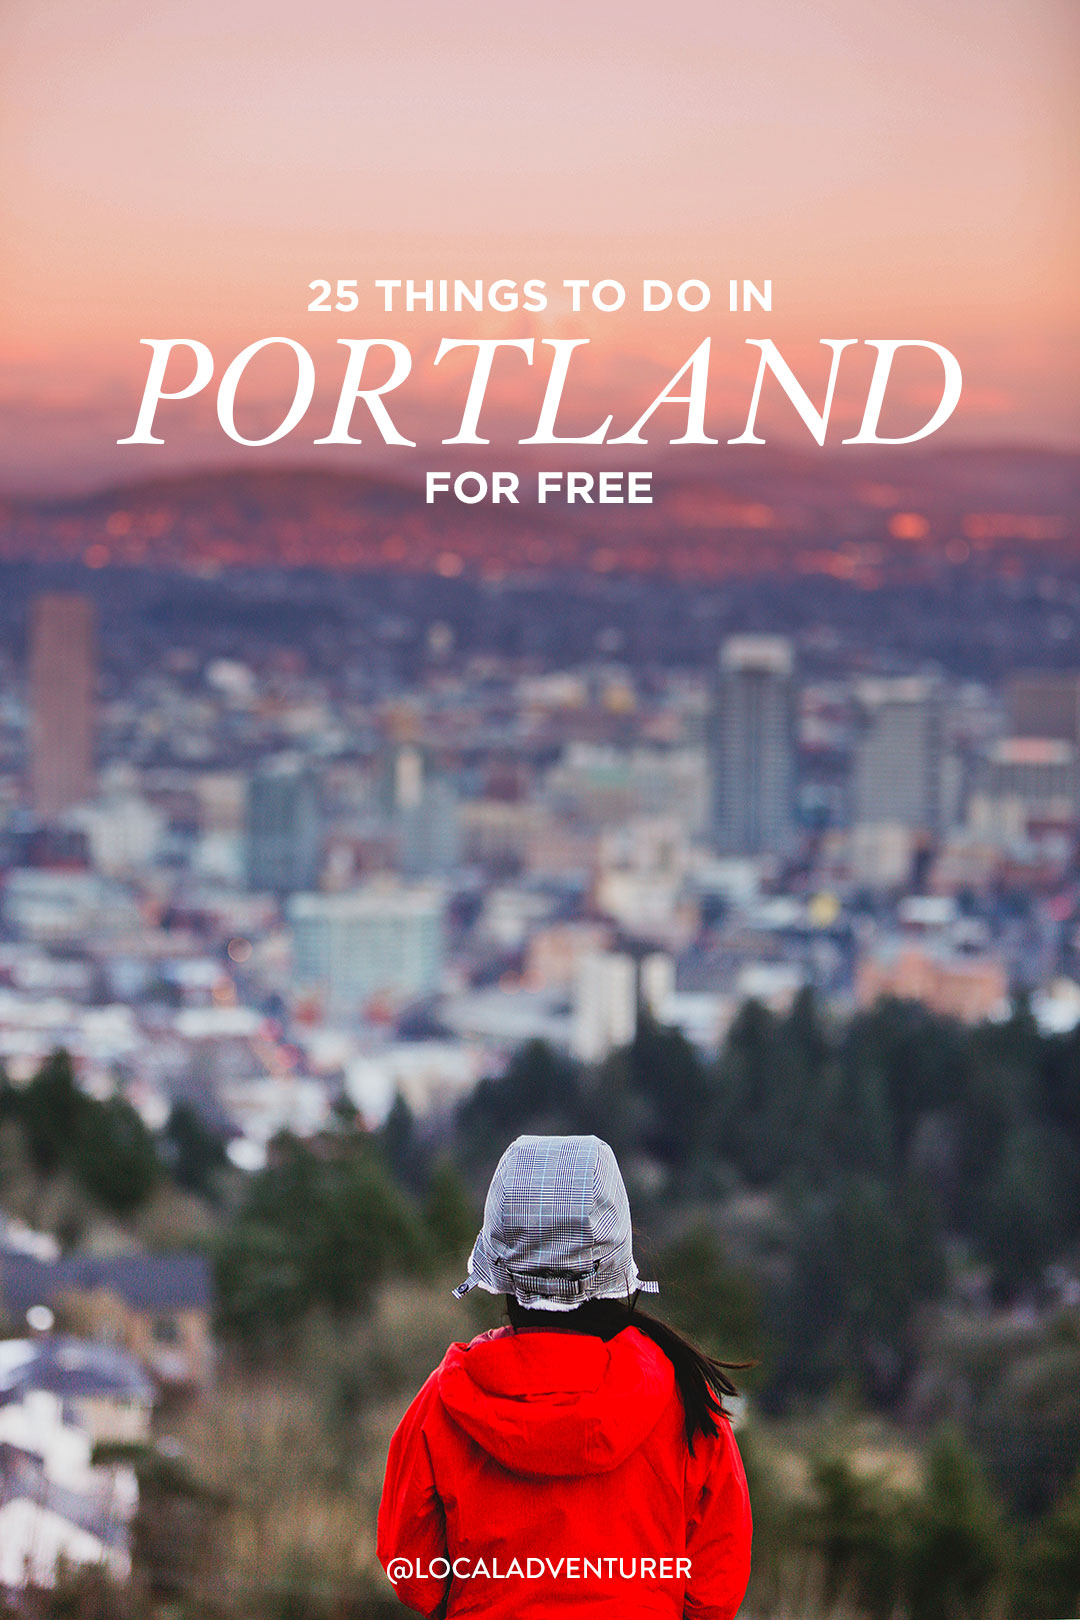 Free Events in Portland OR - Free Portland Events and other Free Activities in Portland // localadventurer.com